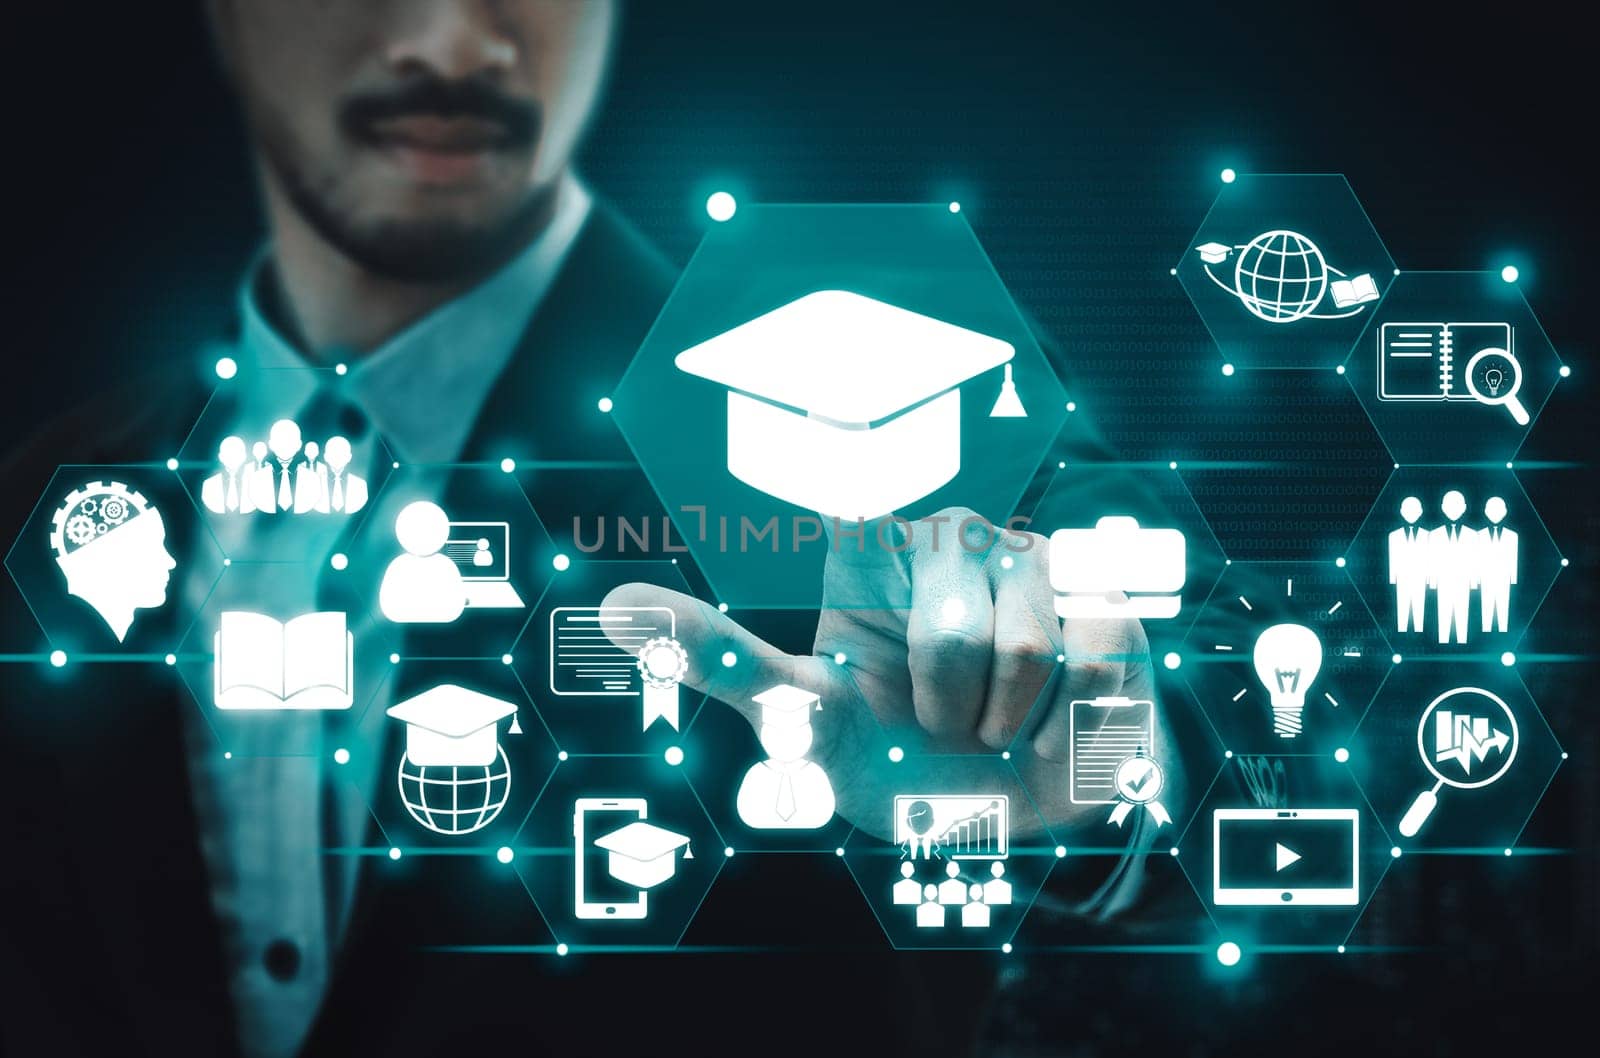 E-learning for Student and University Concept uds by biancoblue